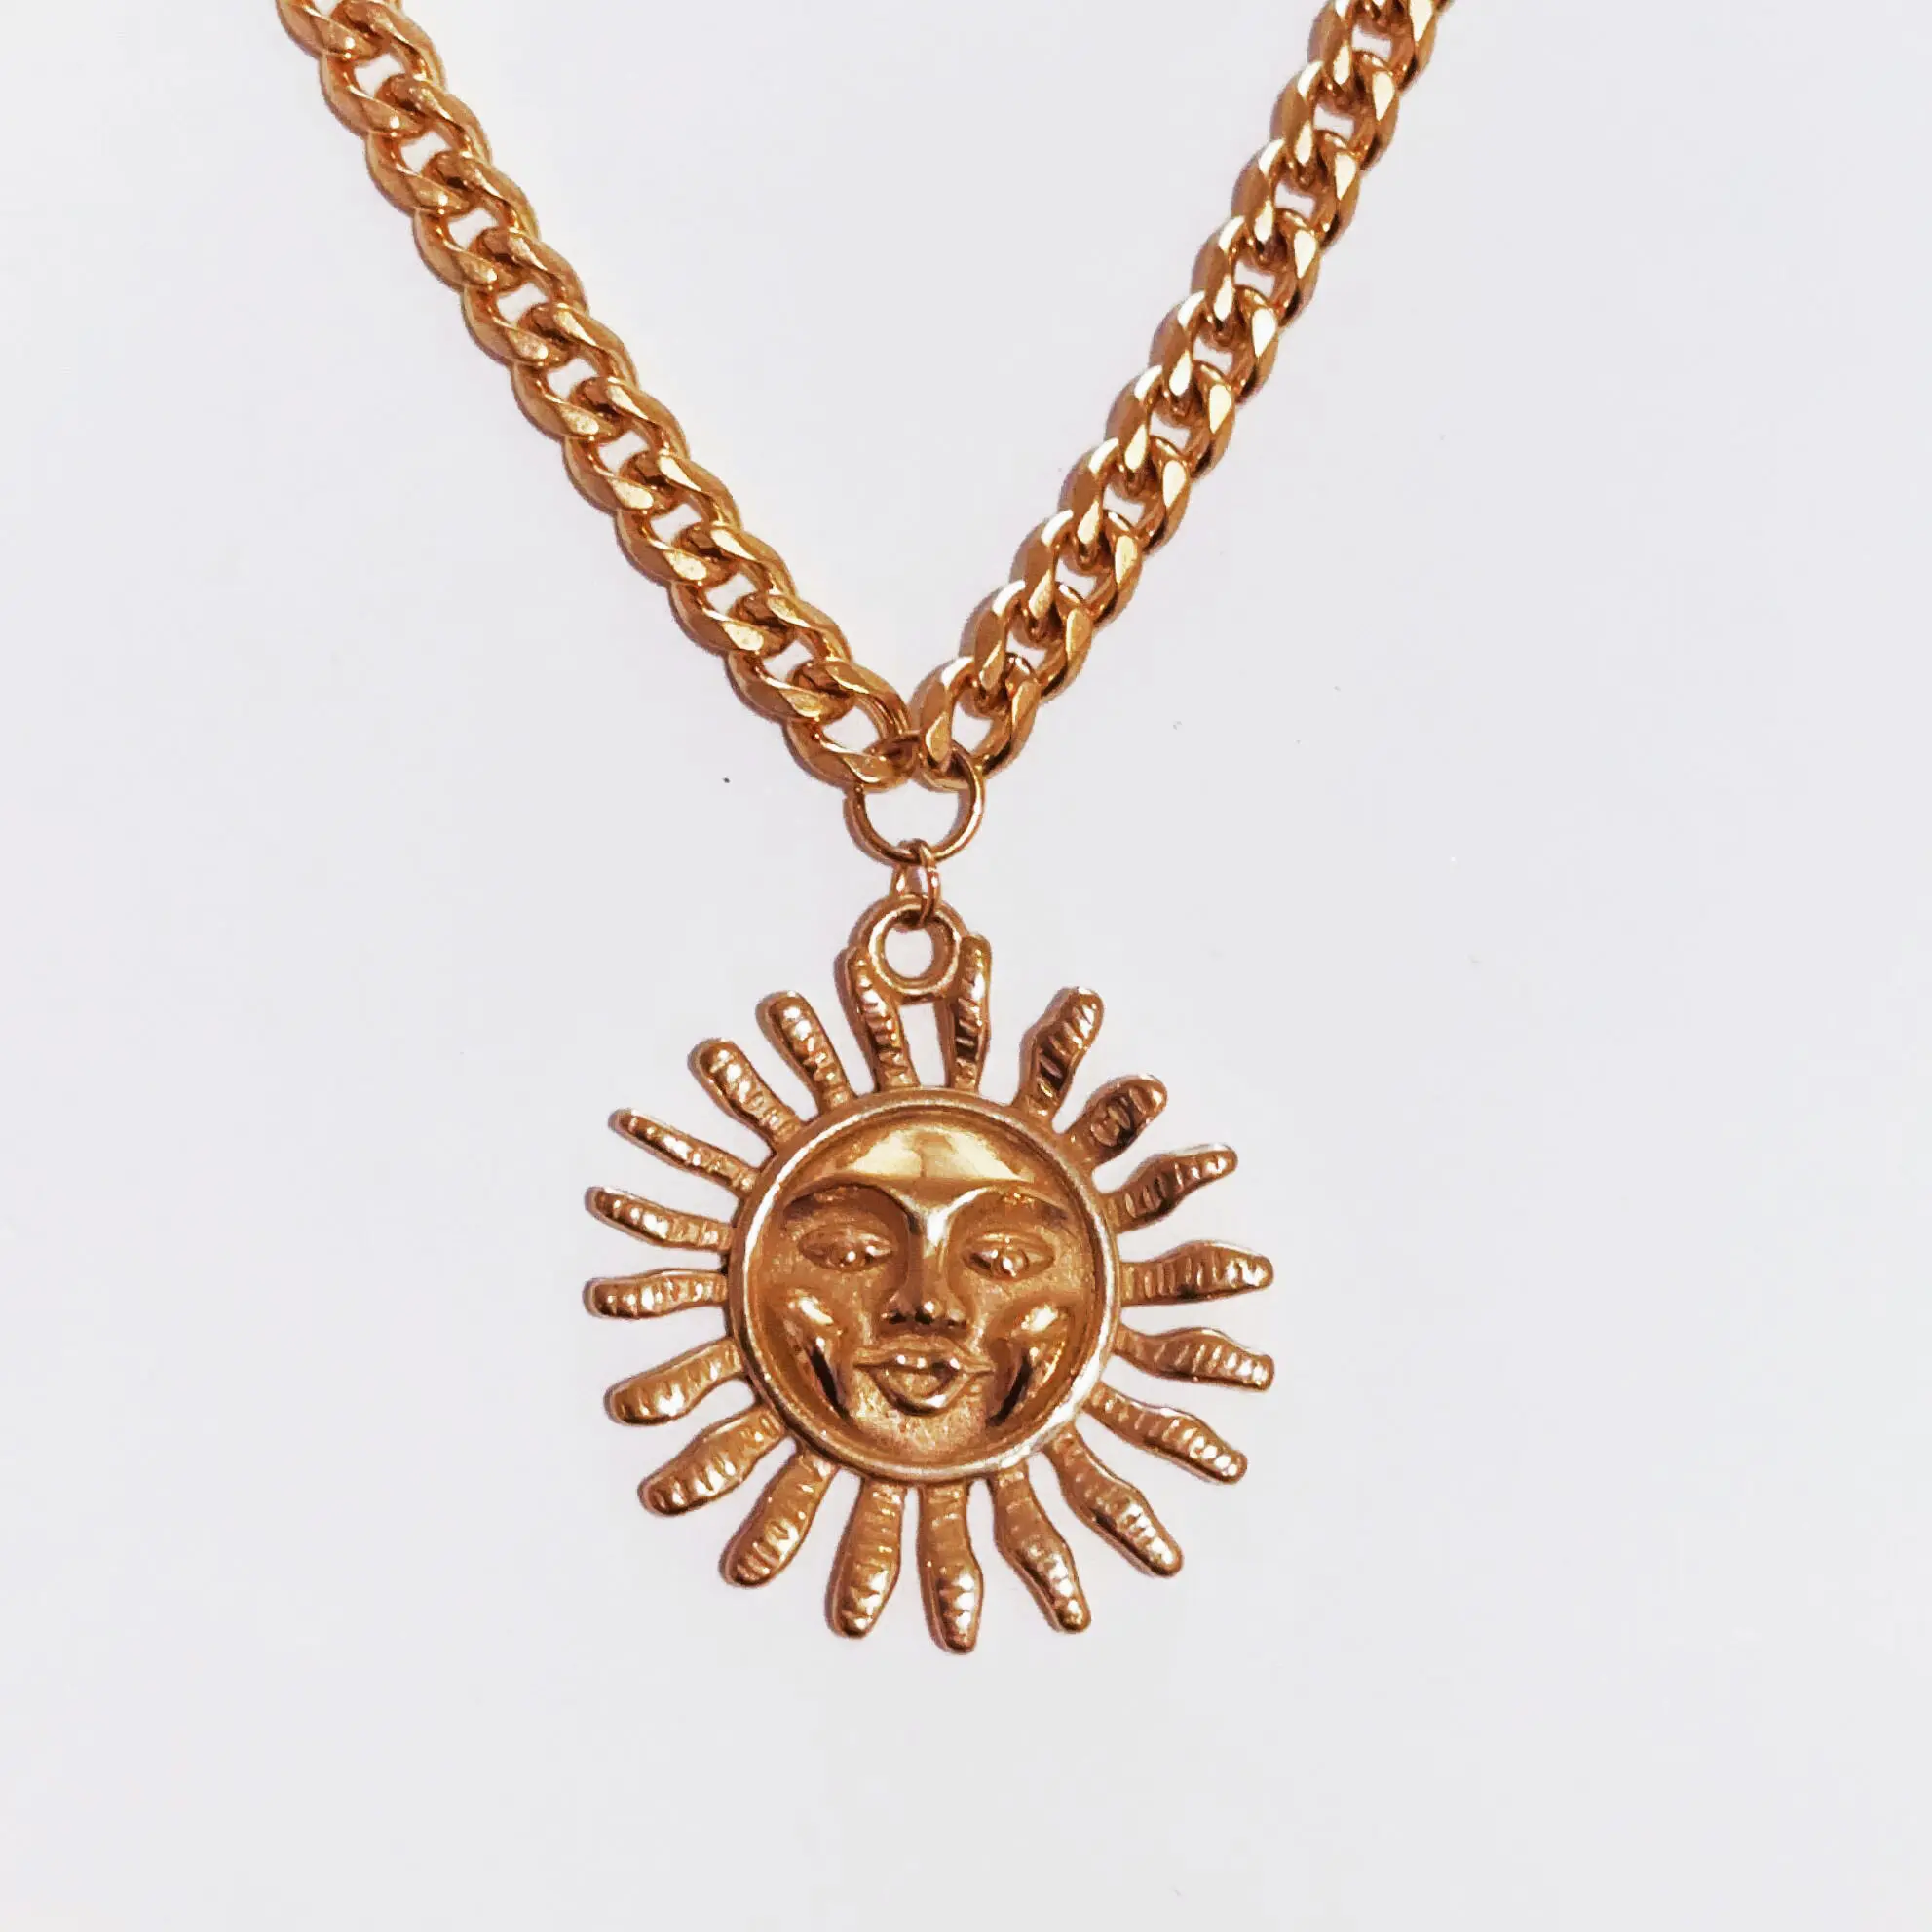 Best Selling High Polished Big Sun Pendant Necklace Stainless Steel HipHops 18k Gold Smile Face Cuban Chain Smooth Sun Necklace